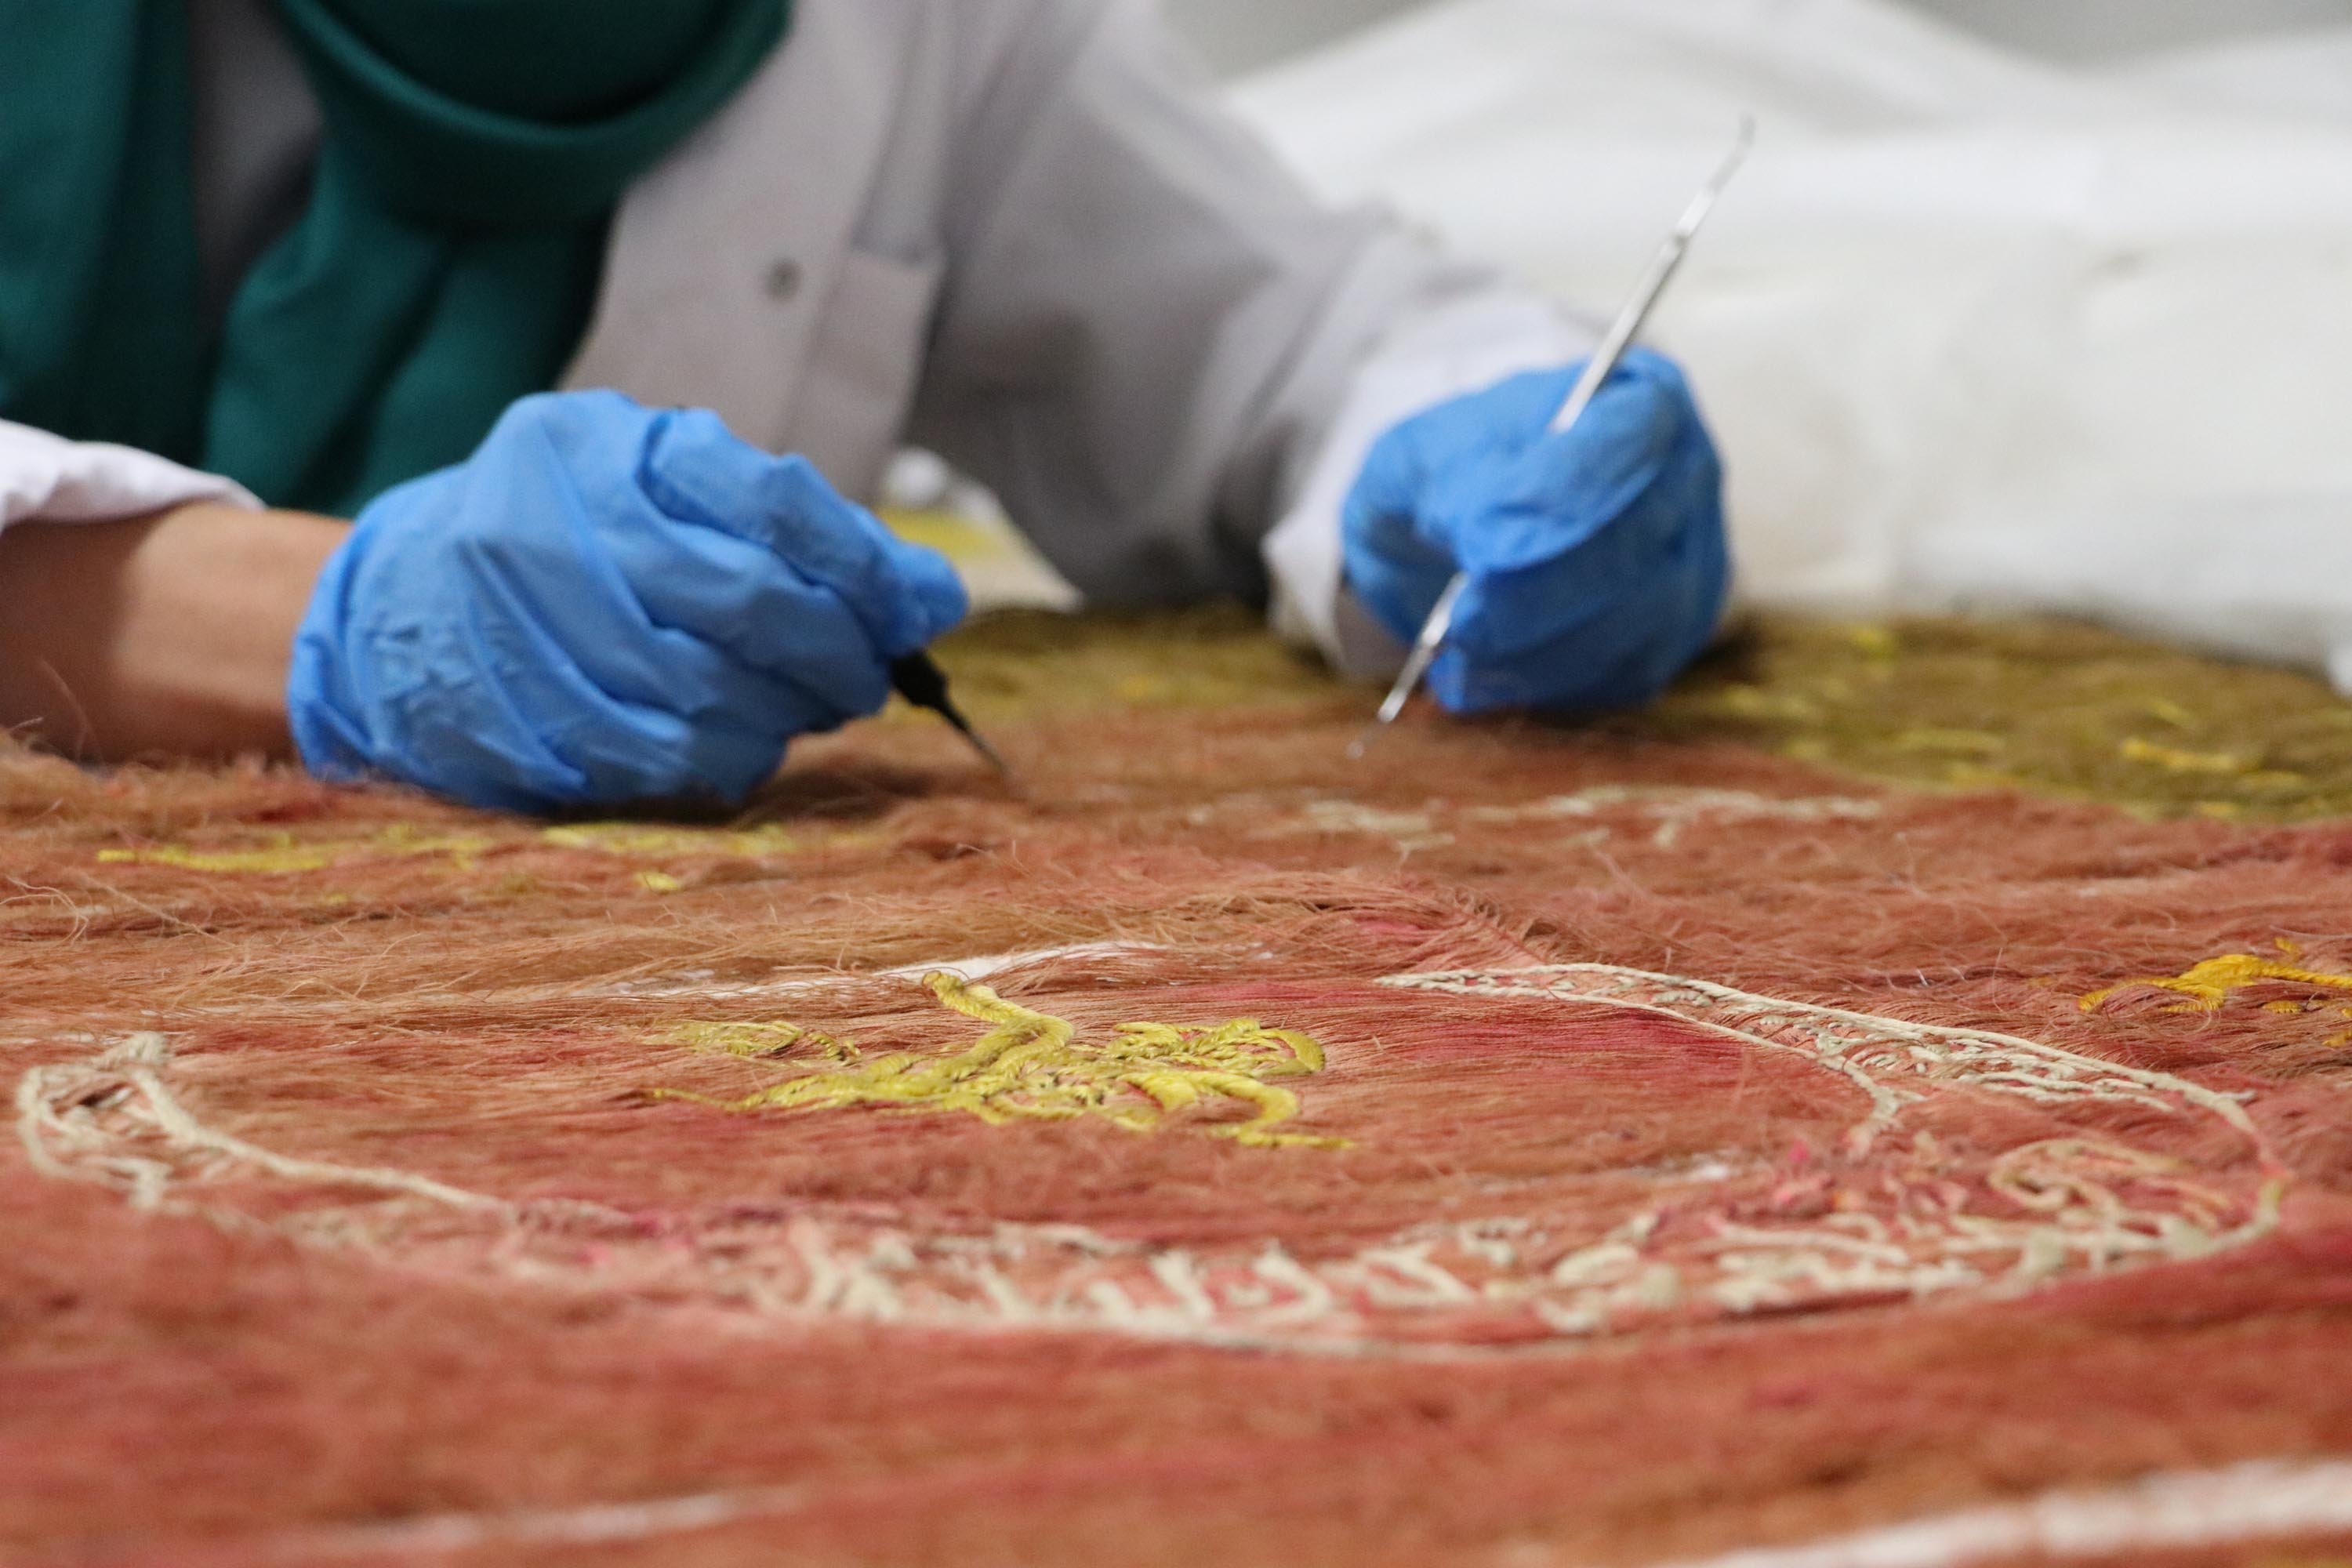 A restorer works on an 18th century flag sent from the Amasya Museum, Ankara, Turkey, January 9, 2022. (DHA Photo)